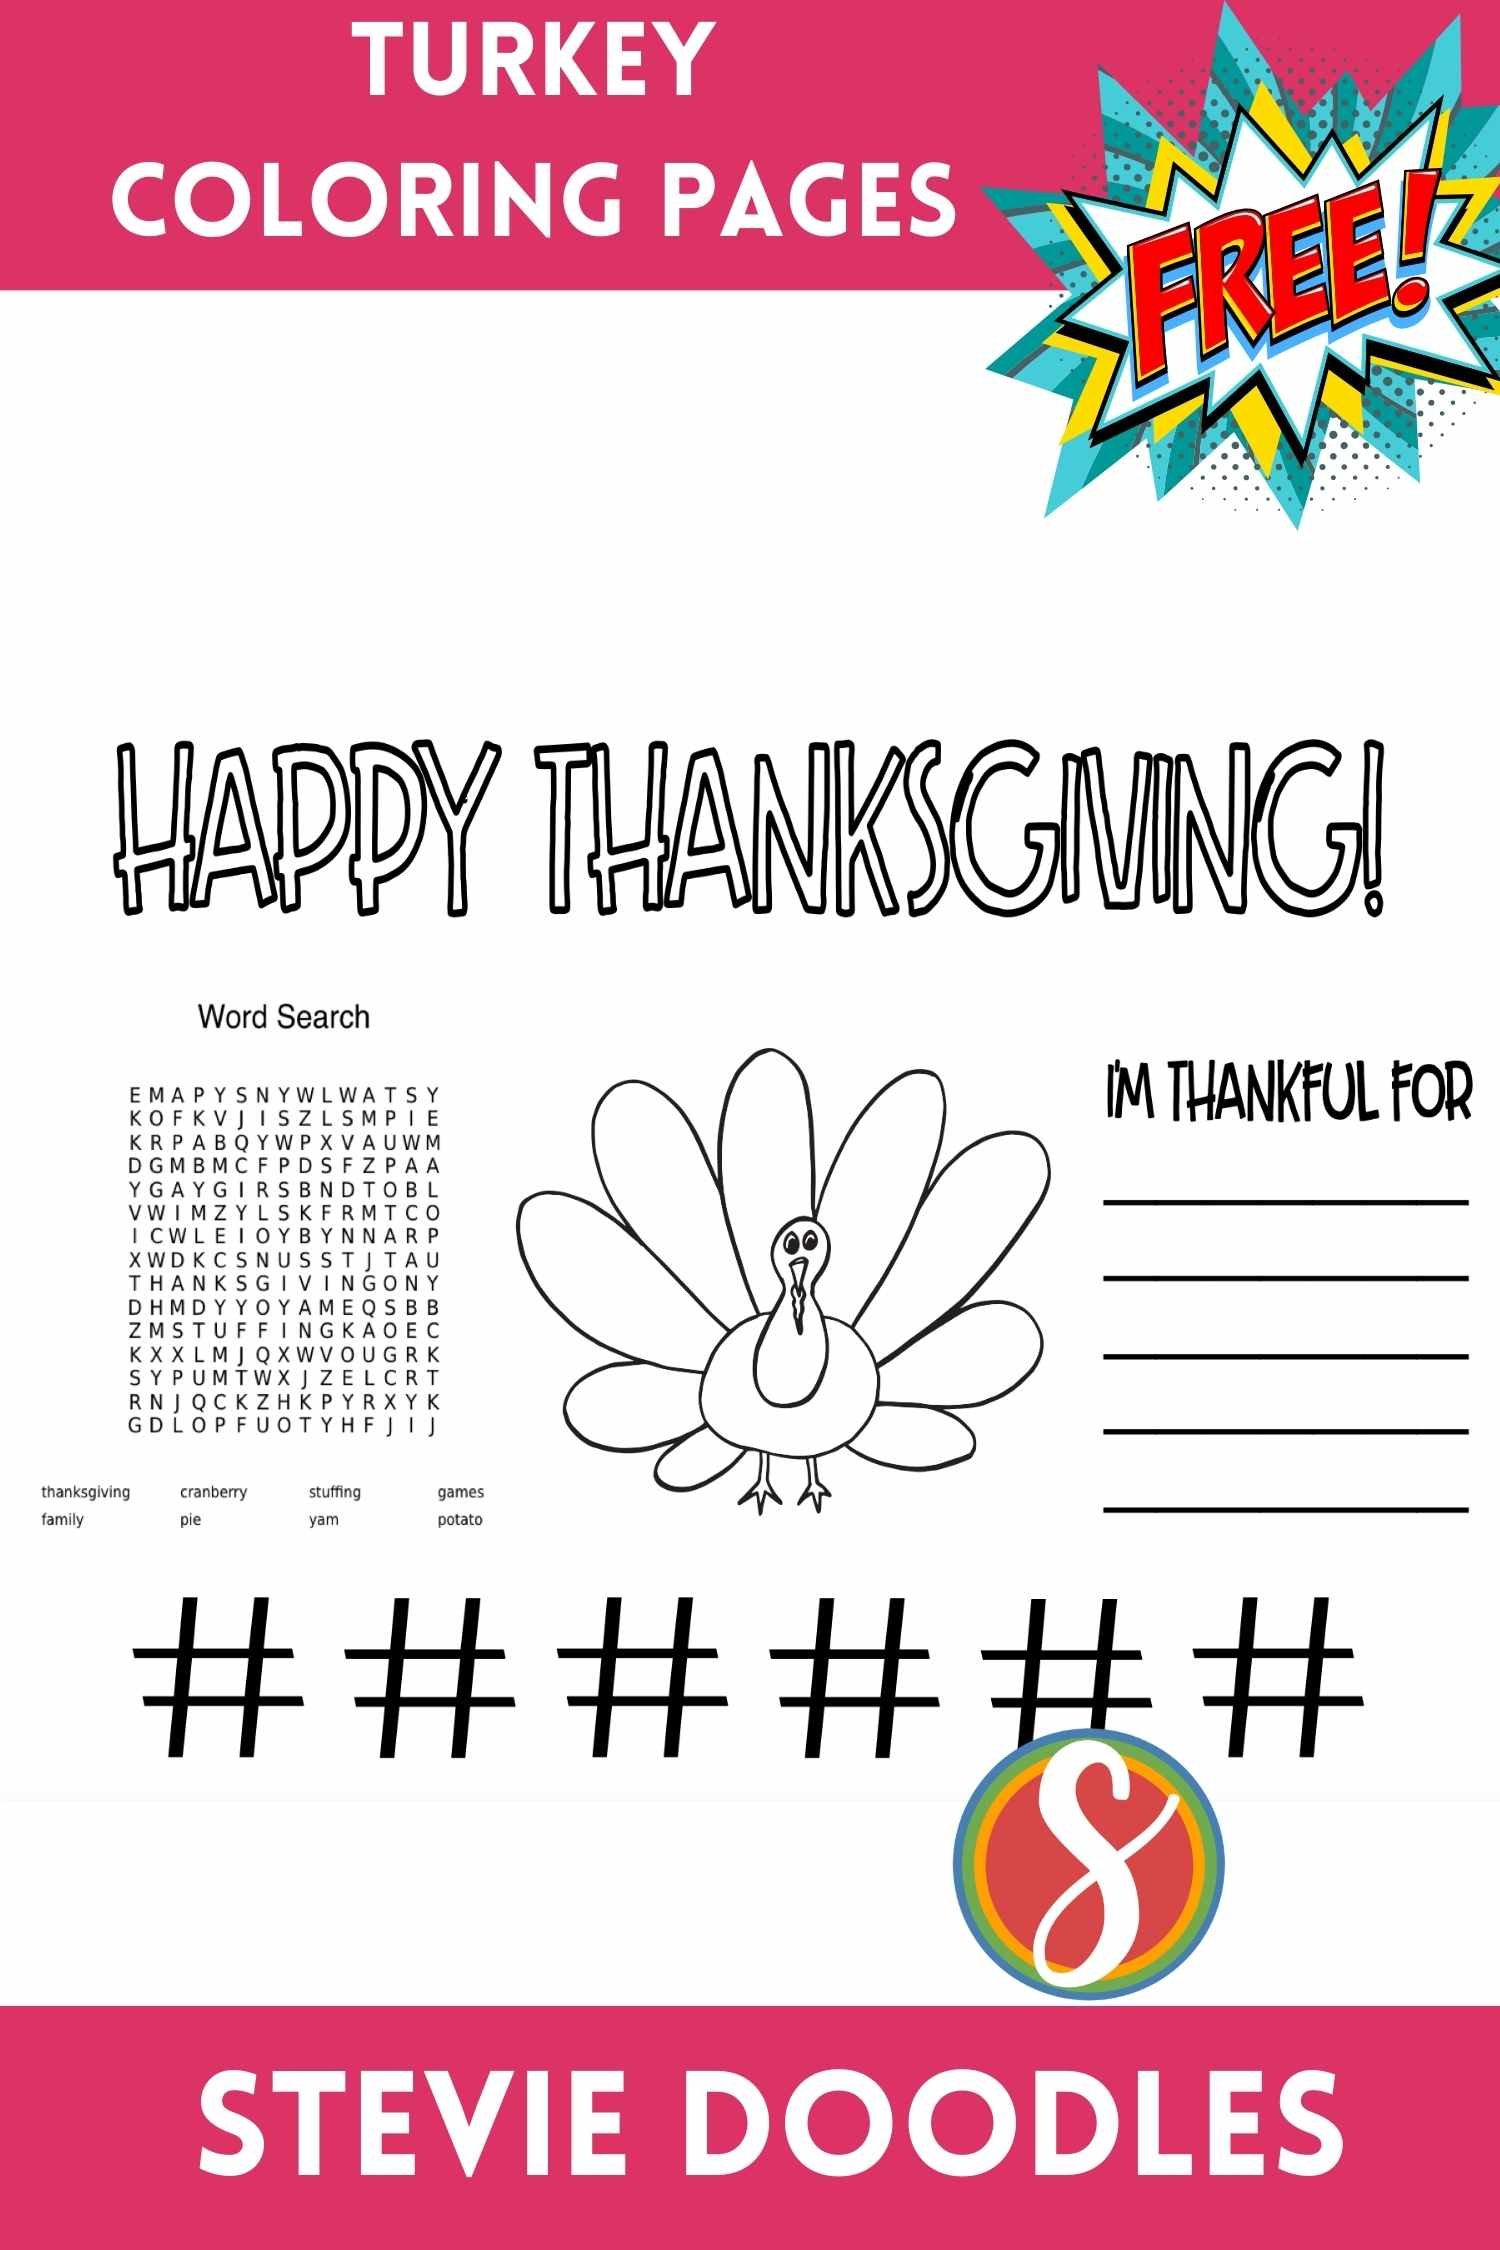 colorable text "happy thanksgiving," thanksgiving word search, "I'm thankful for" list, 6 tic tac toe